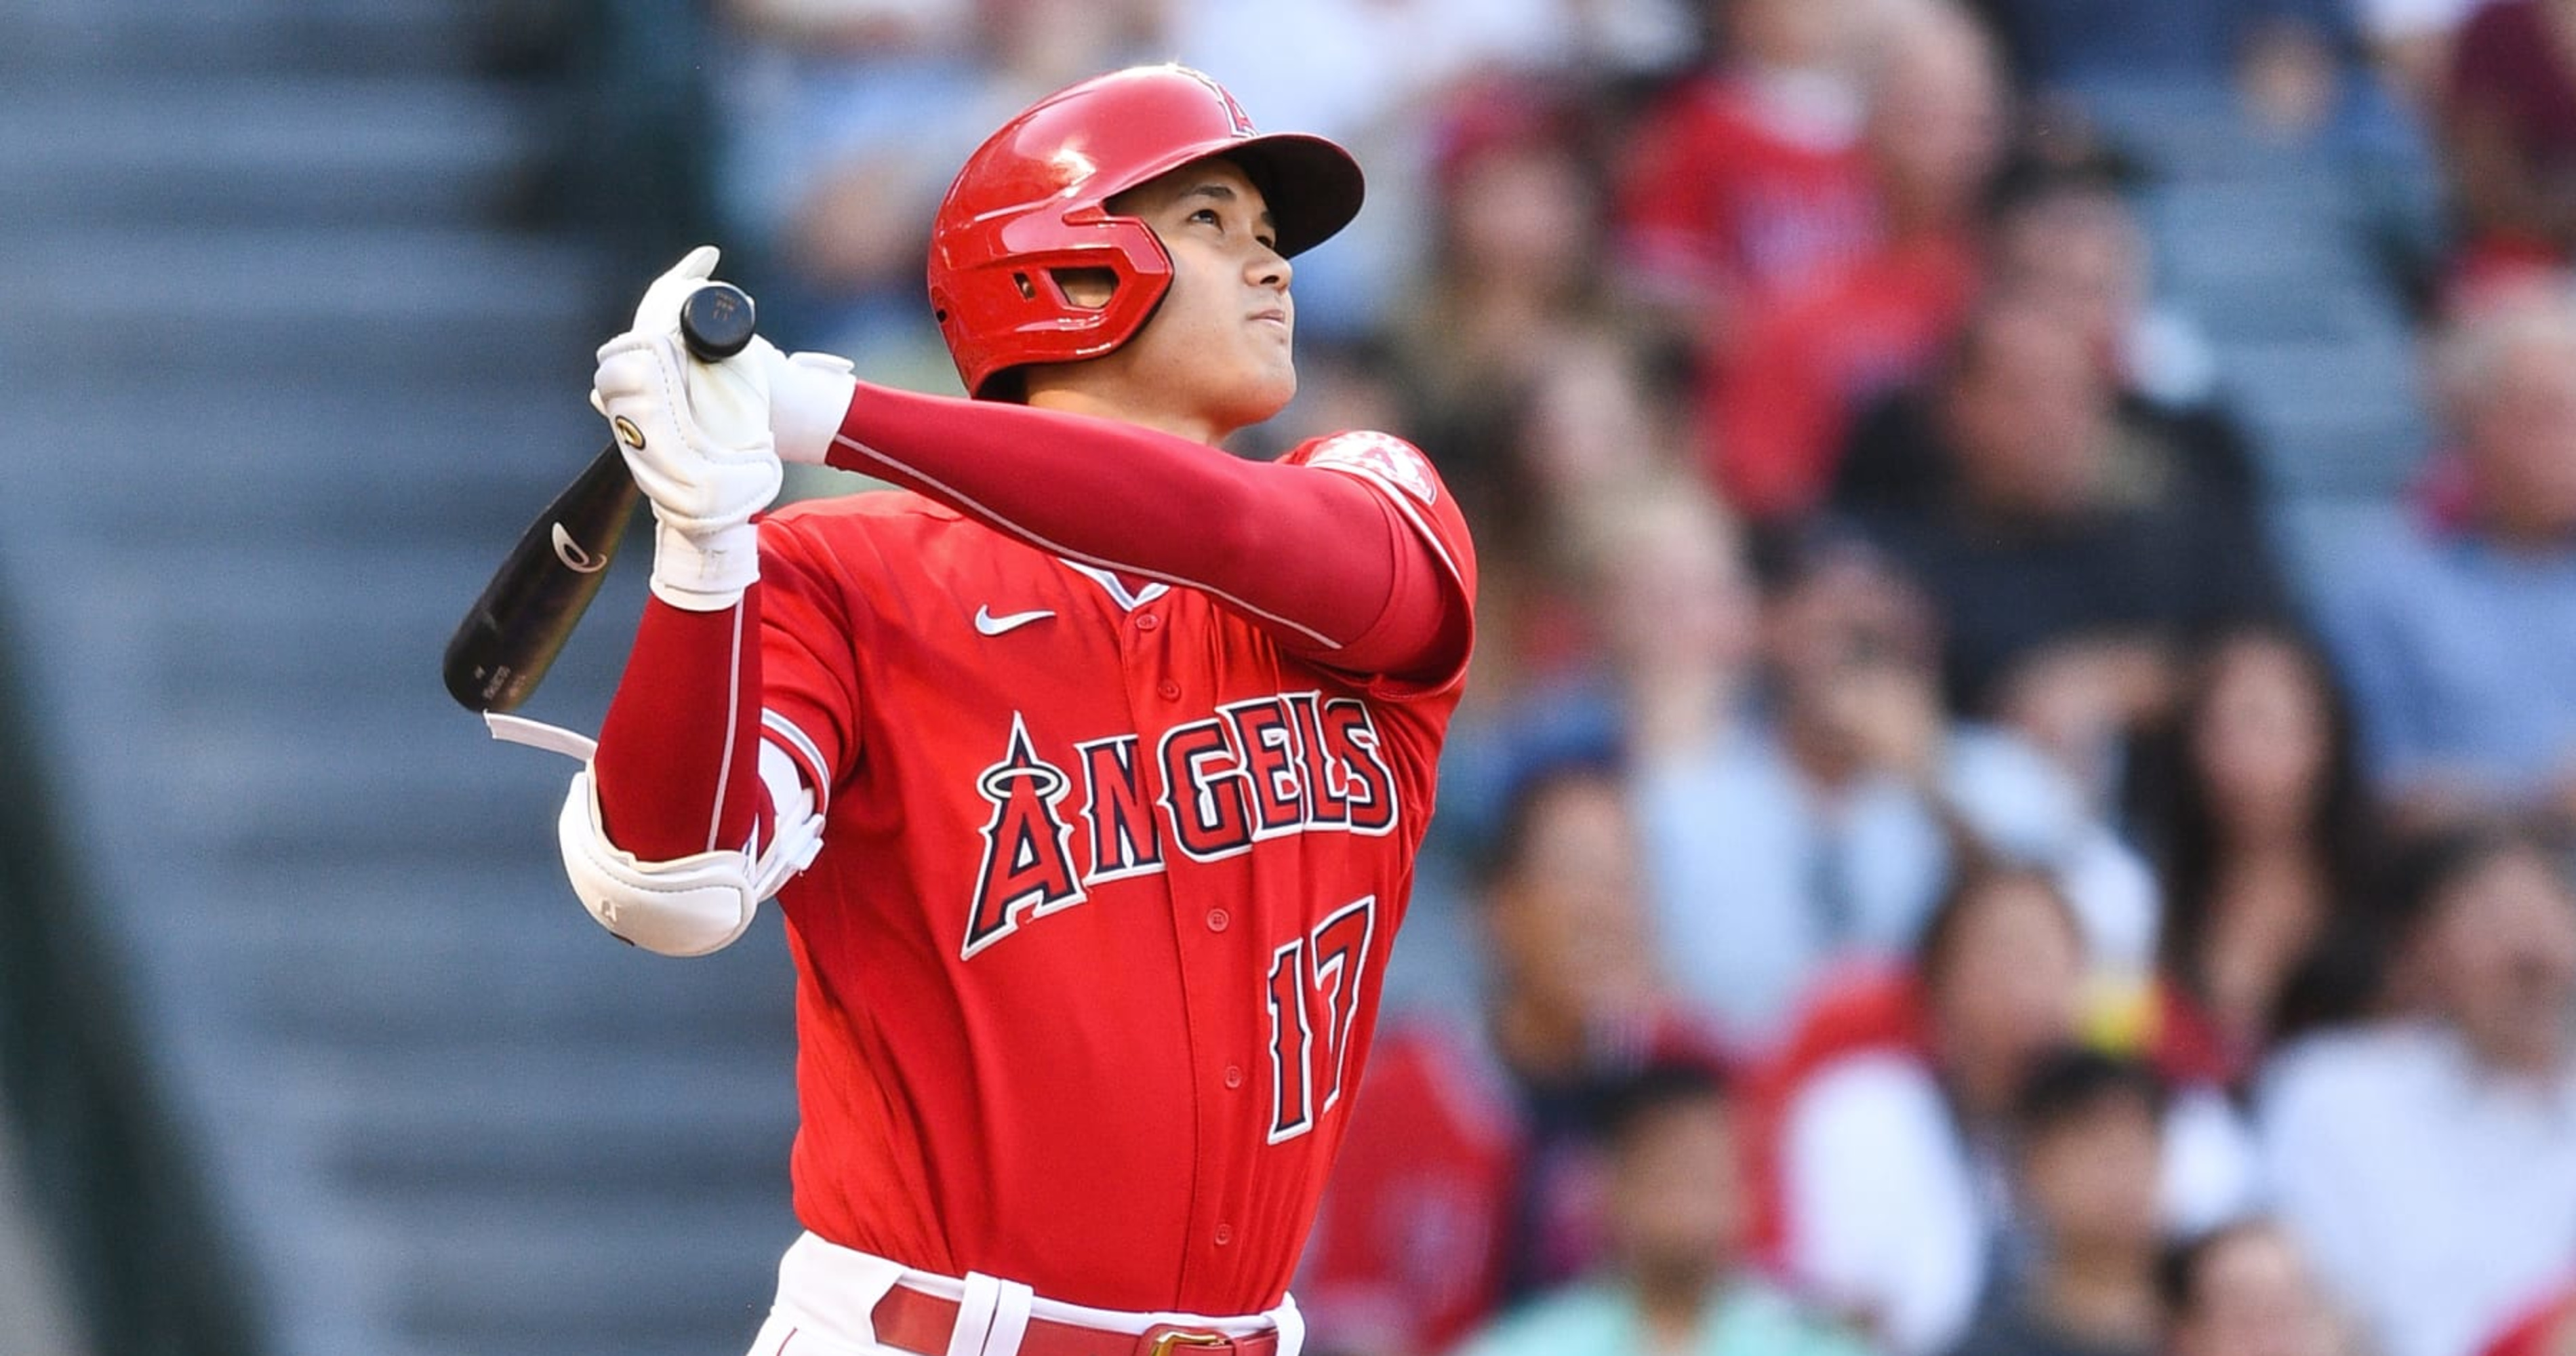 STL Cards in odds race for Shohei Ohtani, but with plenty of competition